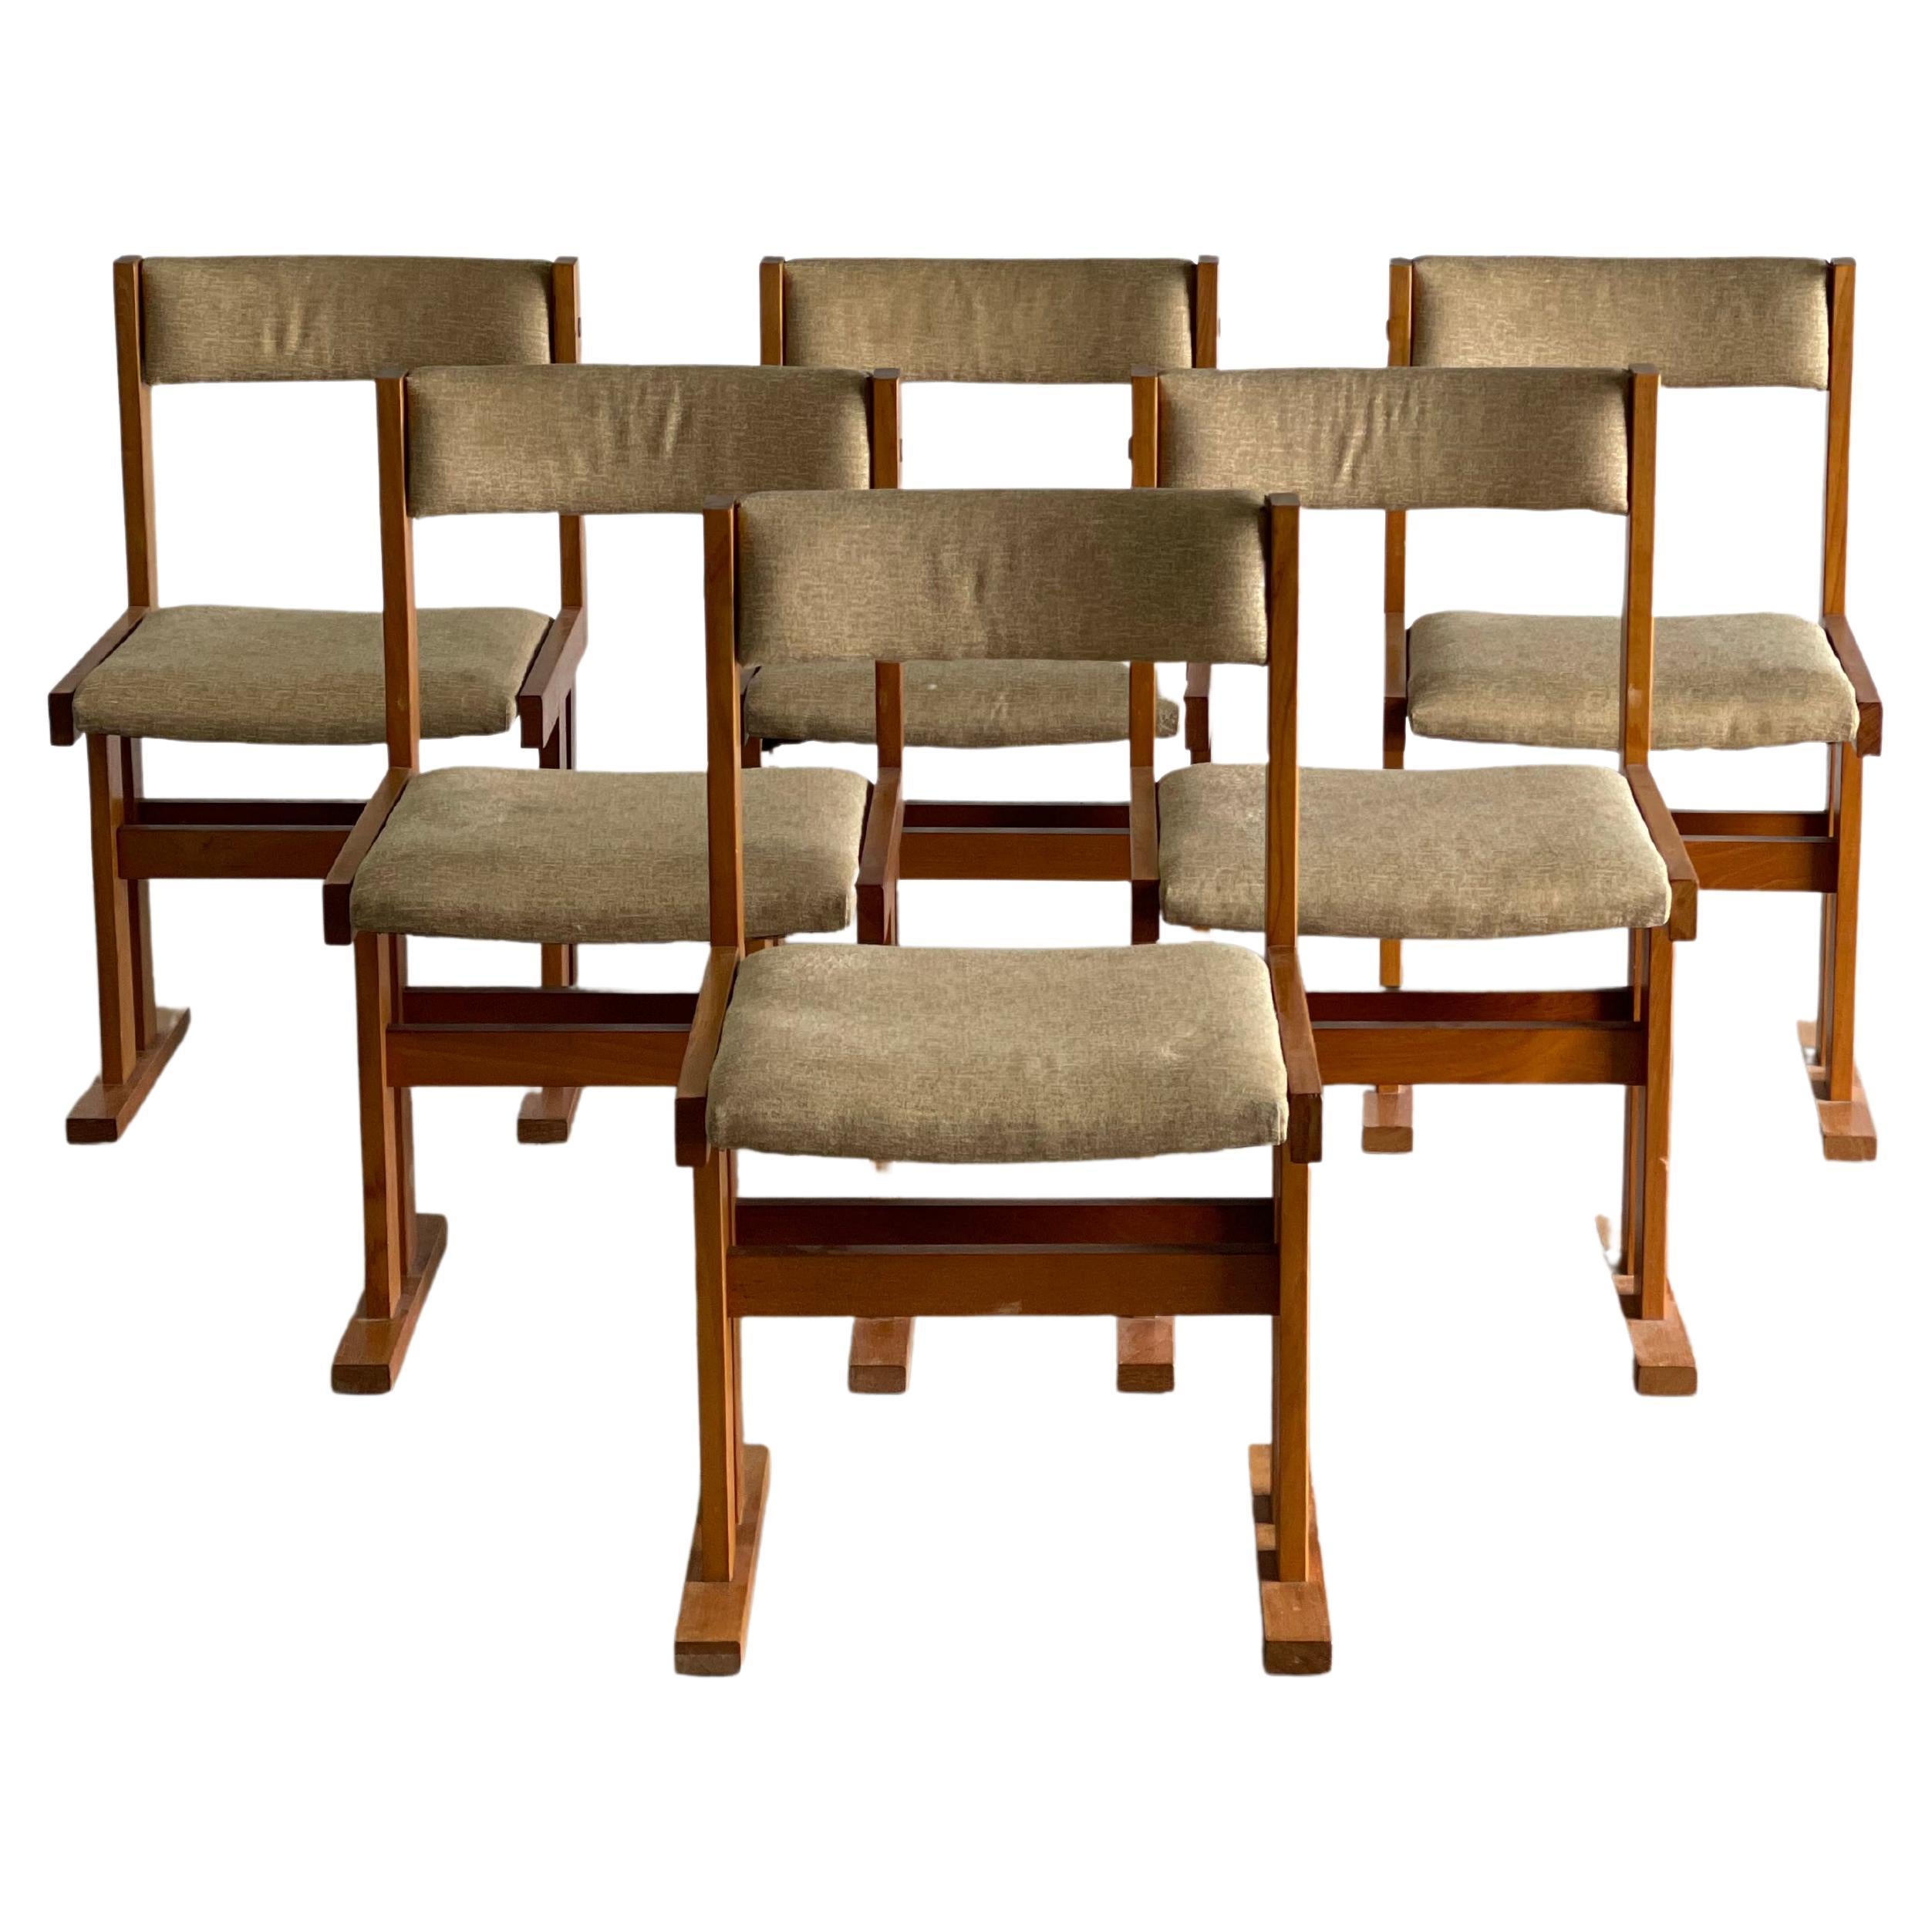 C.1970's

Impressive set of 6 Danish Modern dining chairs reminiscent of the designer Gangsø Møbler. These chairs have solid teak frames, and would pair well with a travertine table. 

Love the trestle style base and geometric design. Ready to